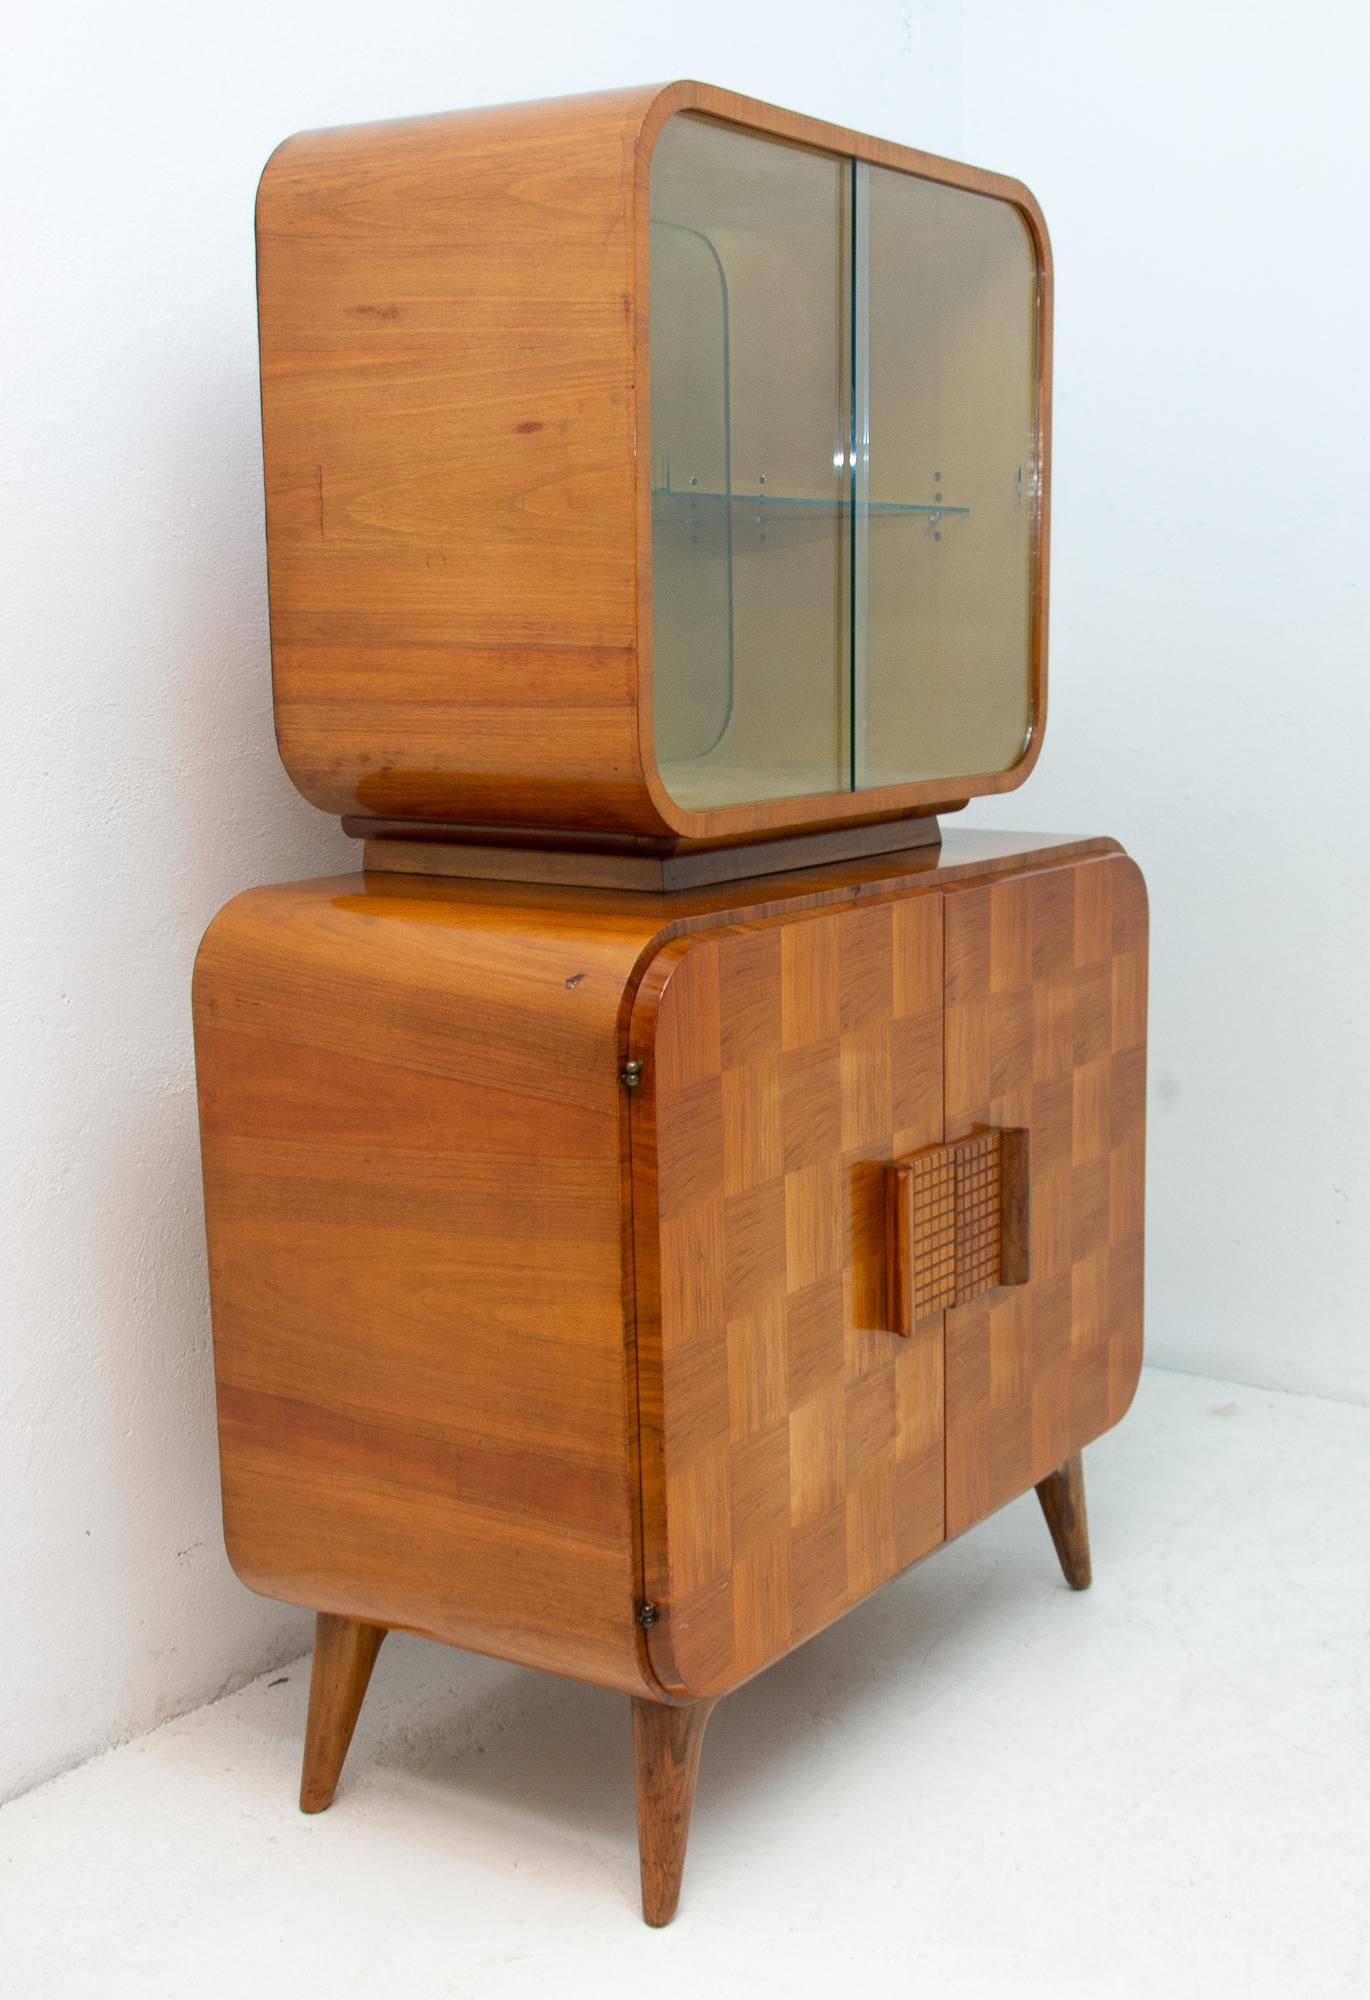 Czech Midcentury Cataloque Display Case by Jindrich Halabala for Up Zavody, 1940s